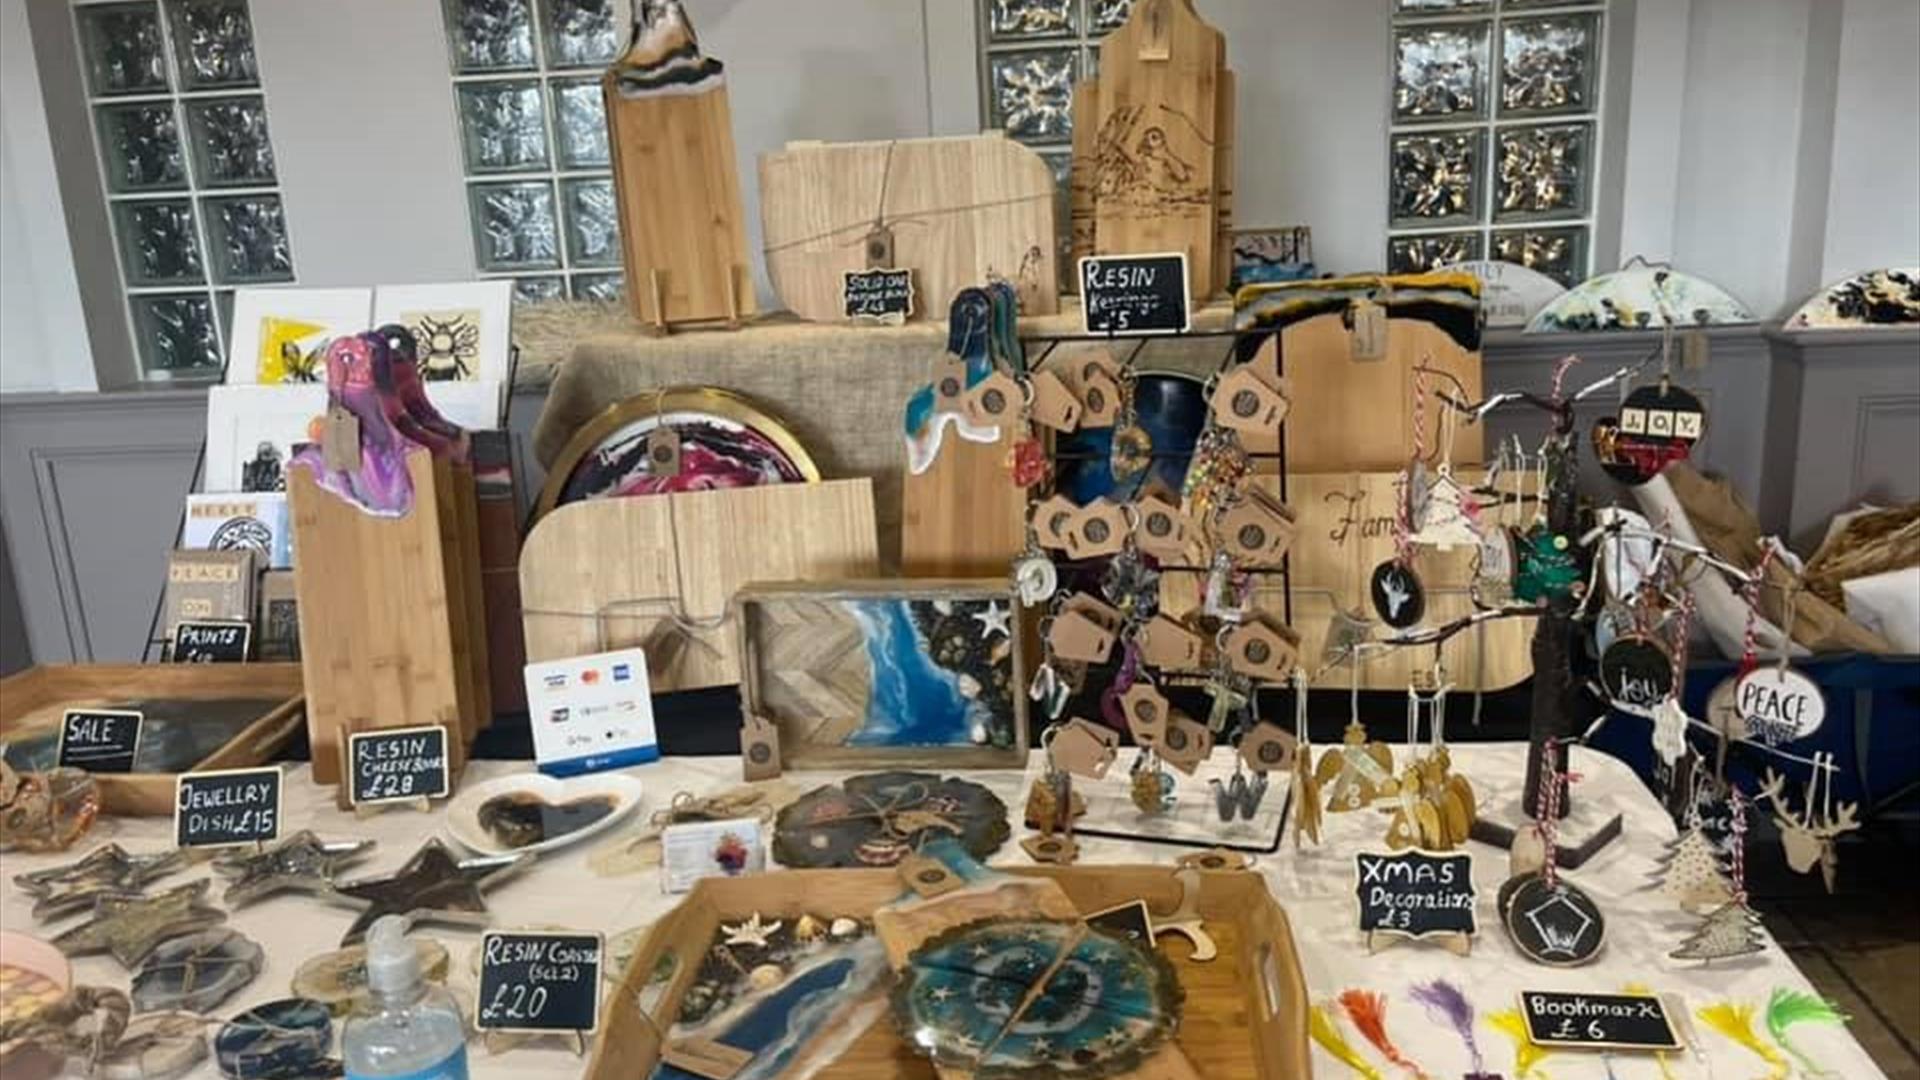 Crafts for Sale